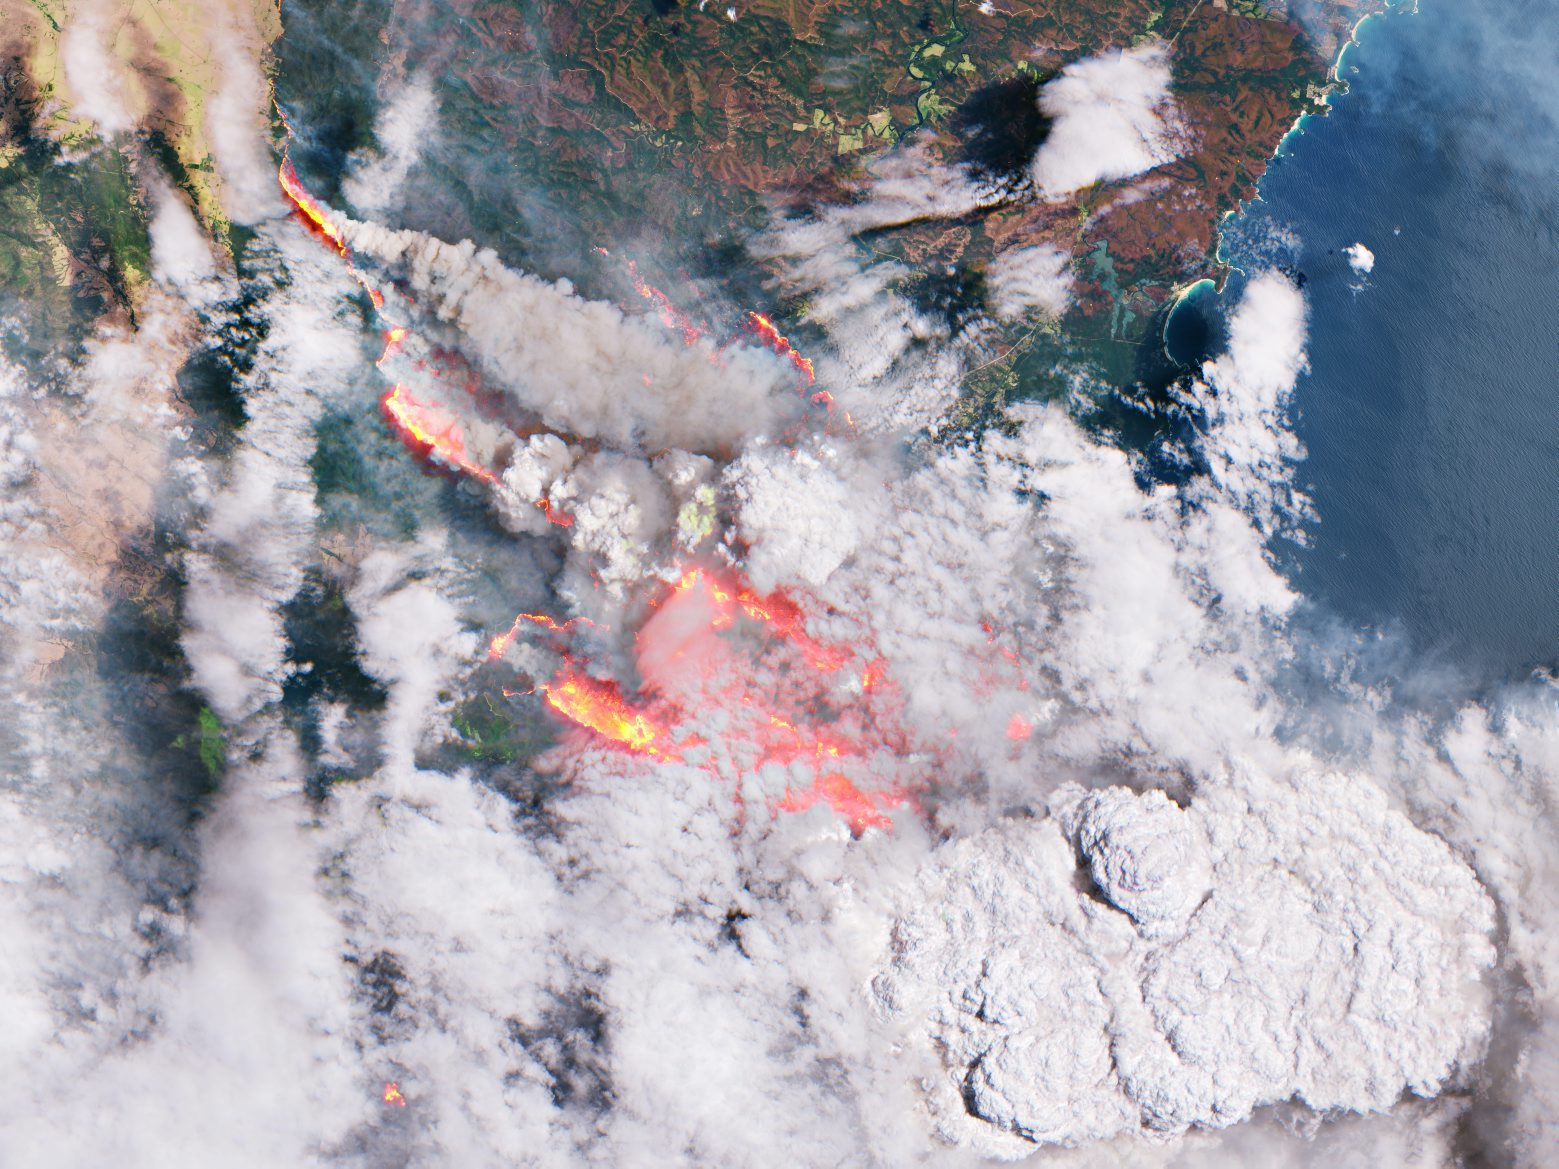 epa08122060 A handout photo made available by the European Space Agency (ESA) shows an image acquired by the Copernicus Sentinel-2 satellites mission of smoke, flames and burn scars over the east coast of Australia, 31 December 2019 (issued 12 January 2020). Ferocious bushfires have been sweeping across Australia since September 2019, fuelled by record-breaking temperatures, drought and wind.  EPA/ESA HANDOUT -- contains modified Copernicus Sentinel data (2019), processed by ESA -- HANDOUT EDITORIAL USE ONLY/NO SALES SPACE AUSTRALIA BUSHFIRES